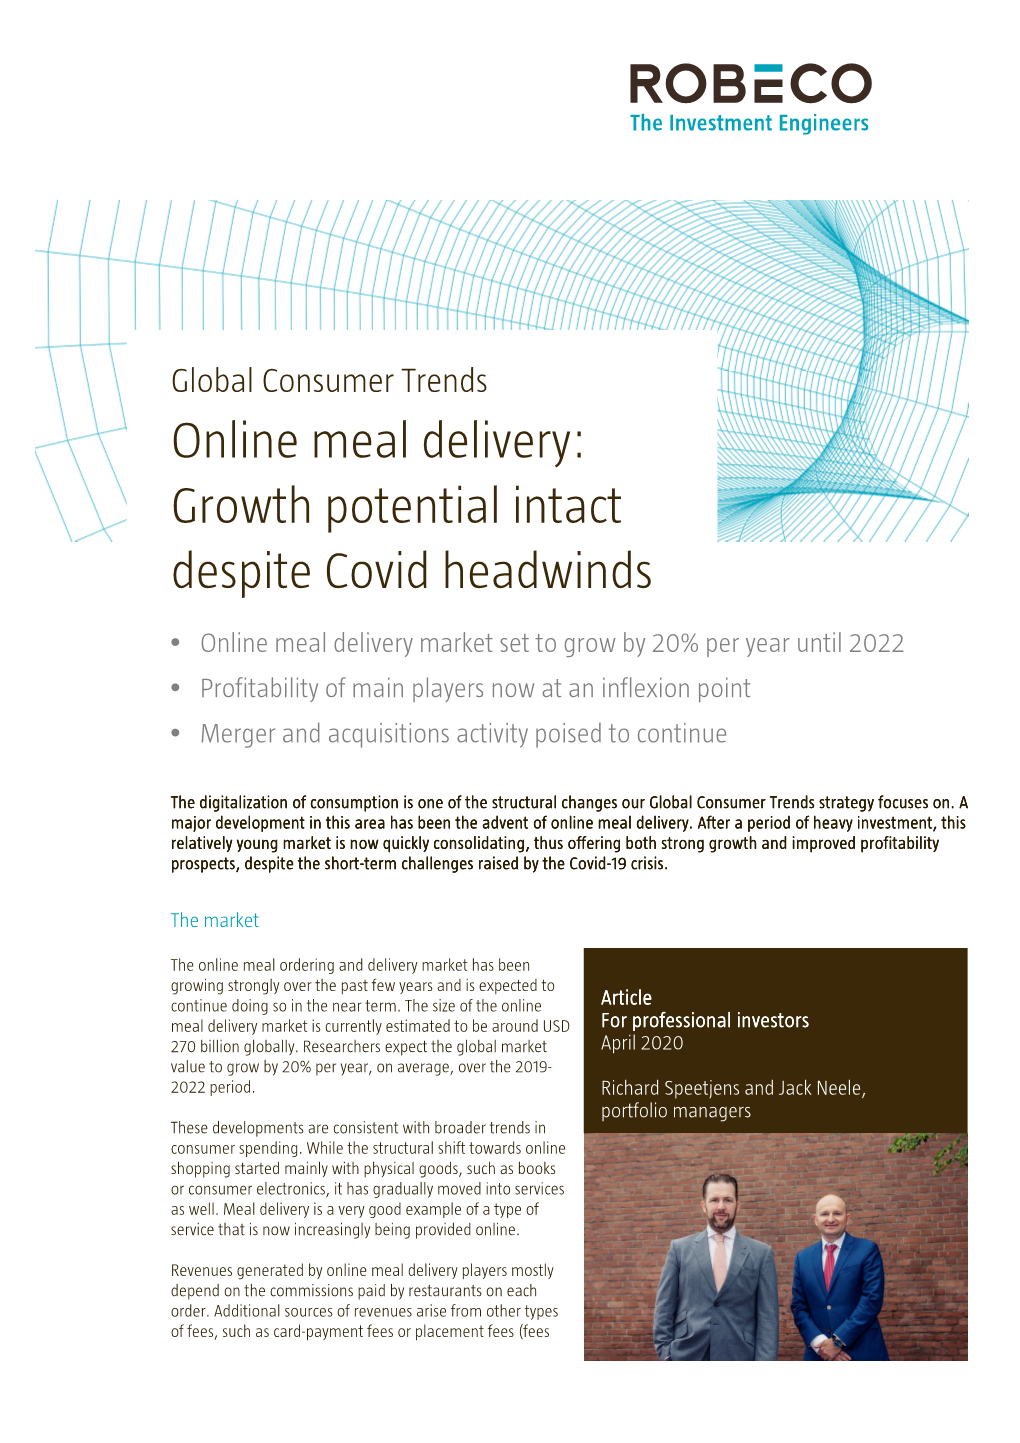 Online Meal Delivery: Growth Potential Intact Despite Covid Headwinds